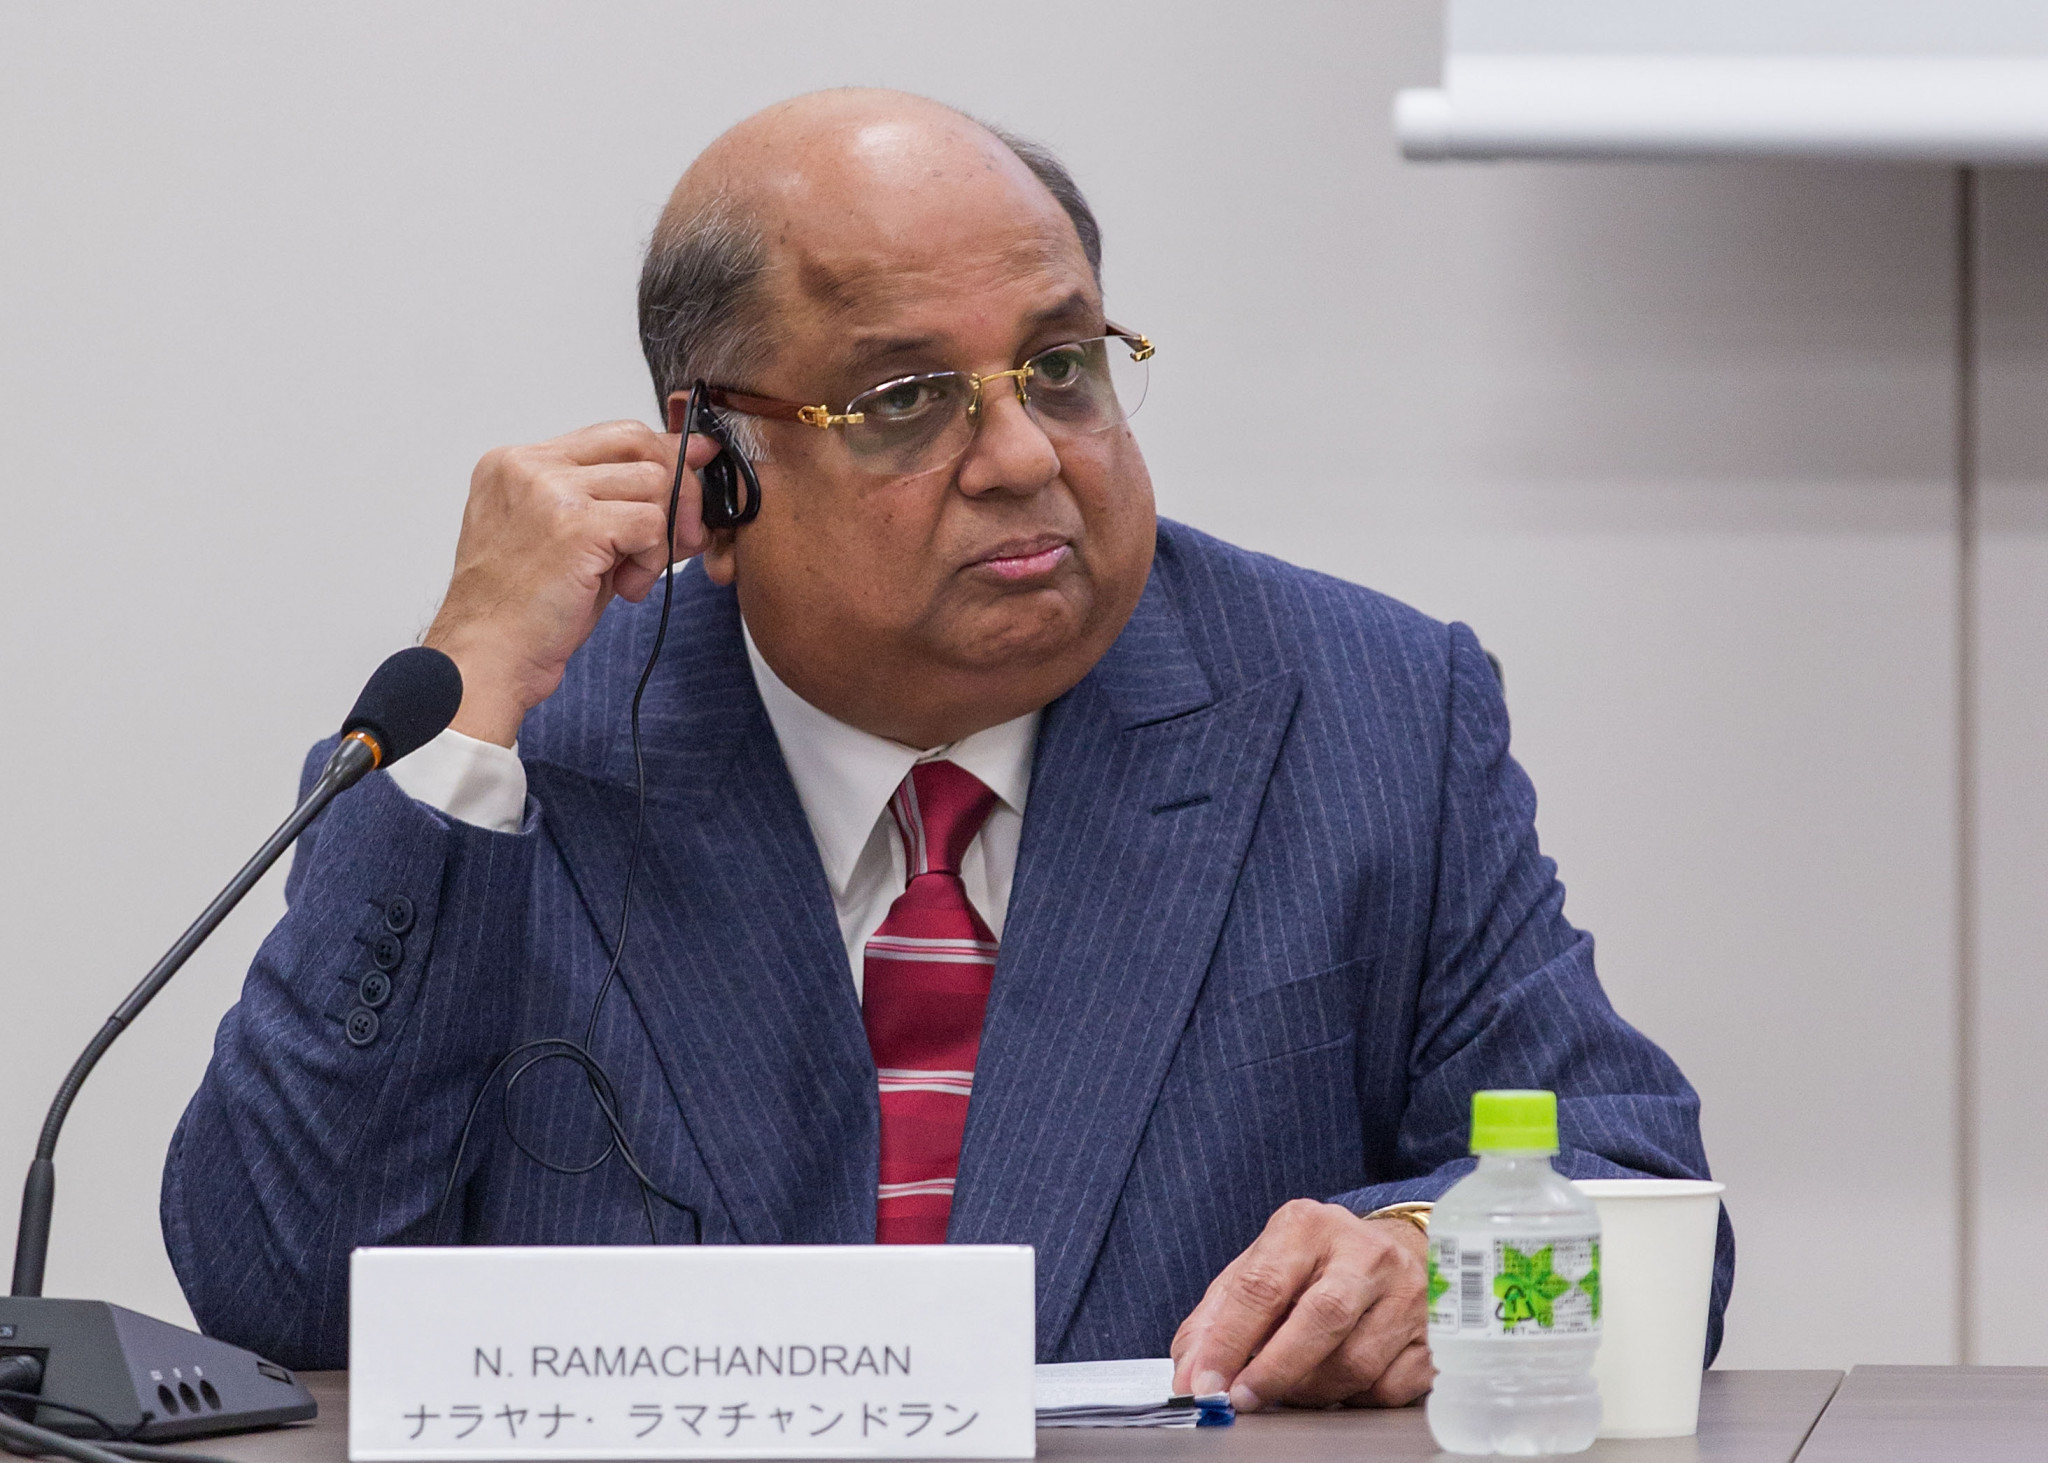 N. Ramachandran will not seek re-election as Indian Olympic Association President ©Getty Images